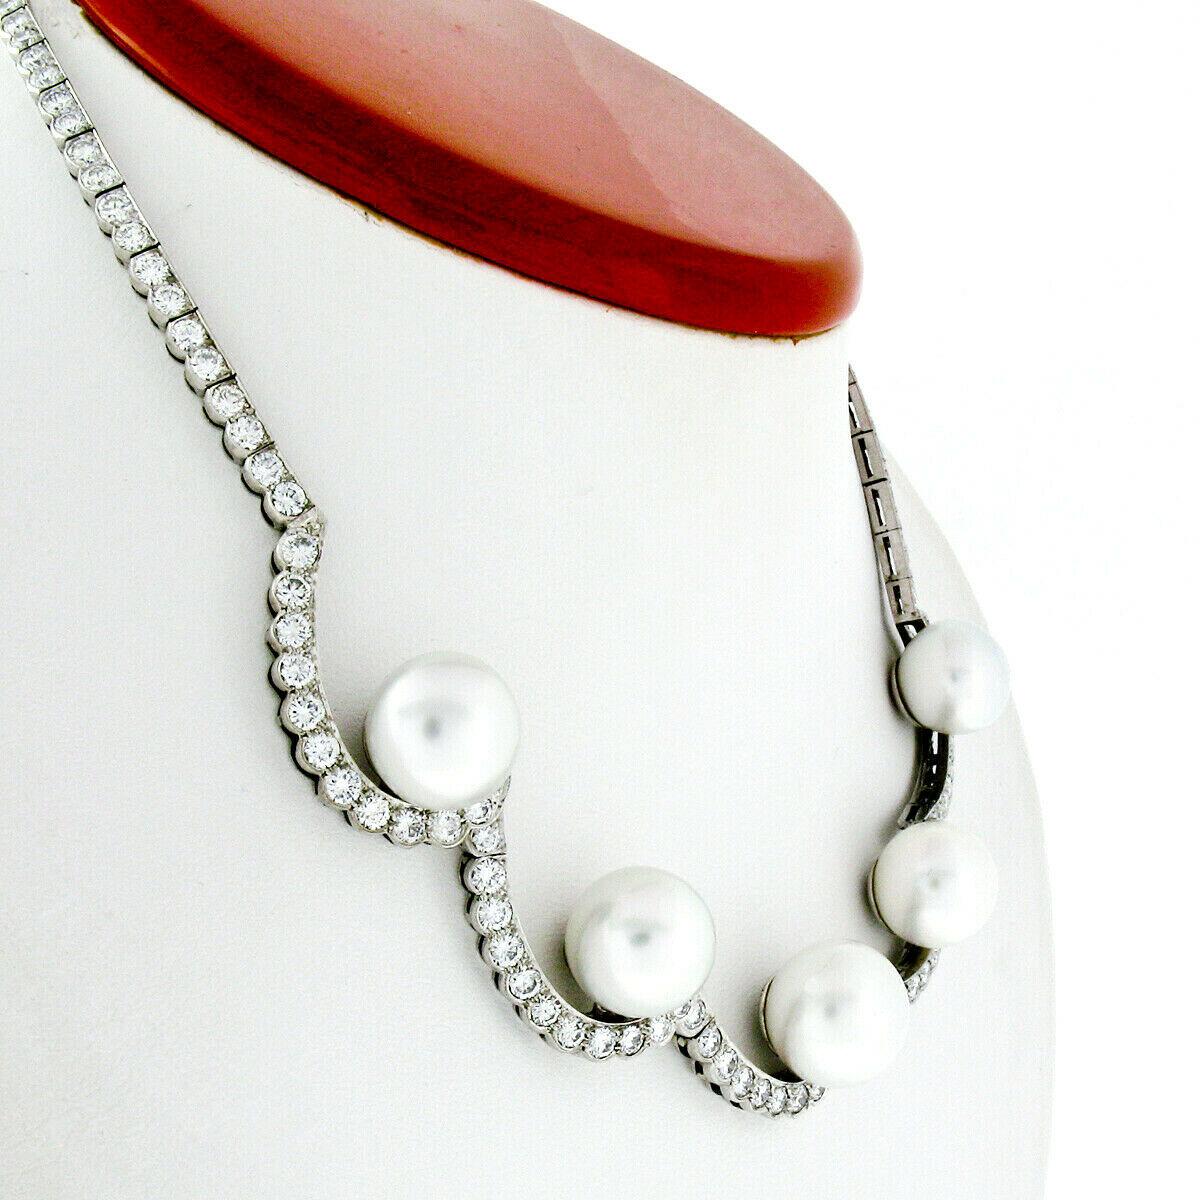 Round Cut Platinum 10.25 Carat Diamond and Floating South Sea Pearl Statement Necklace For Sale